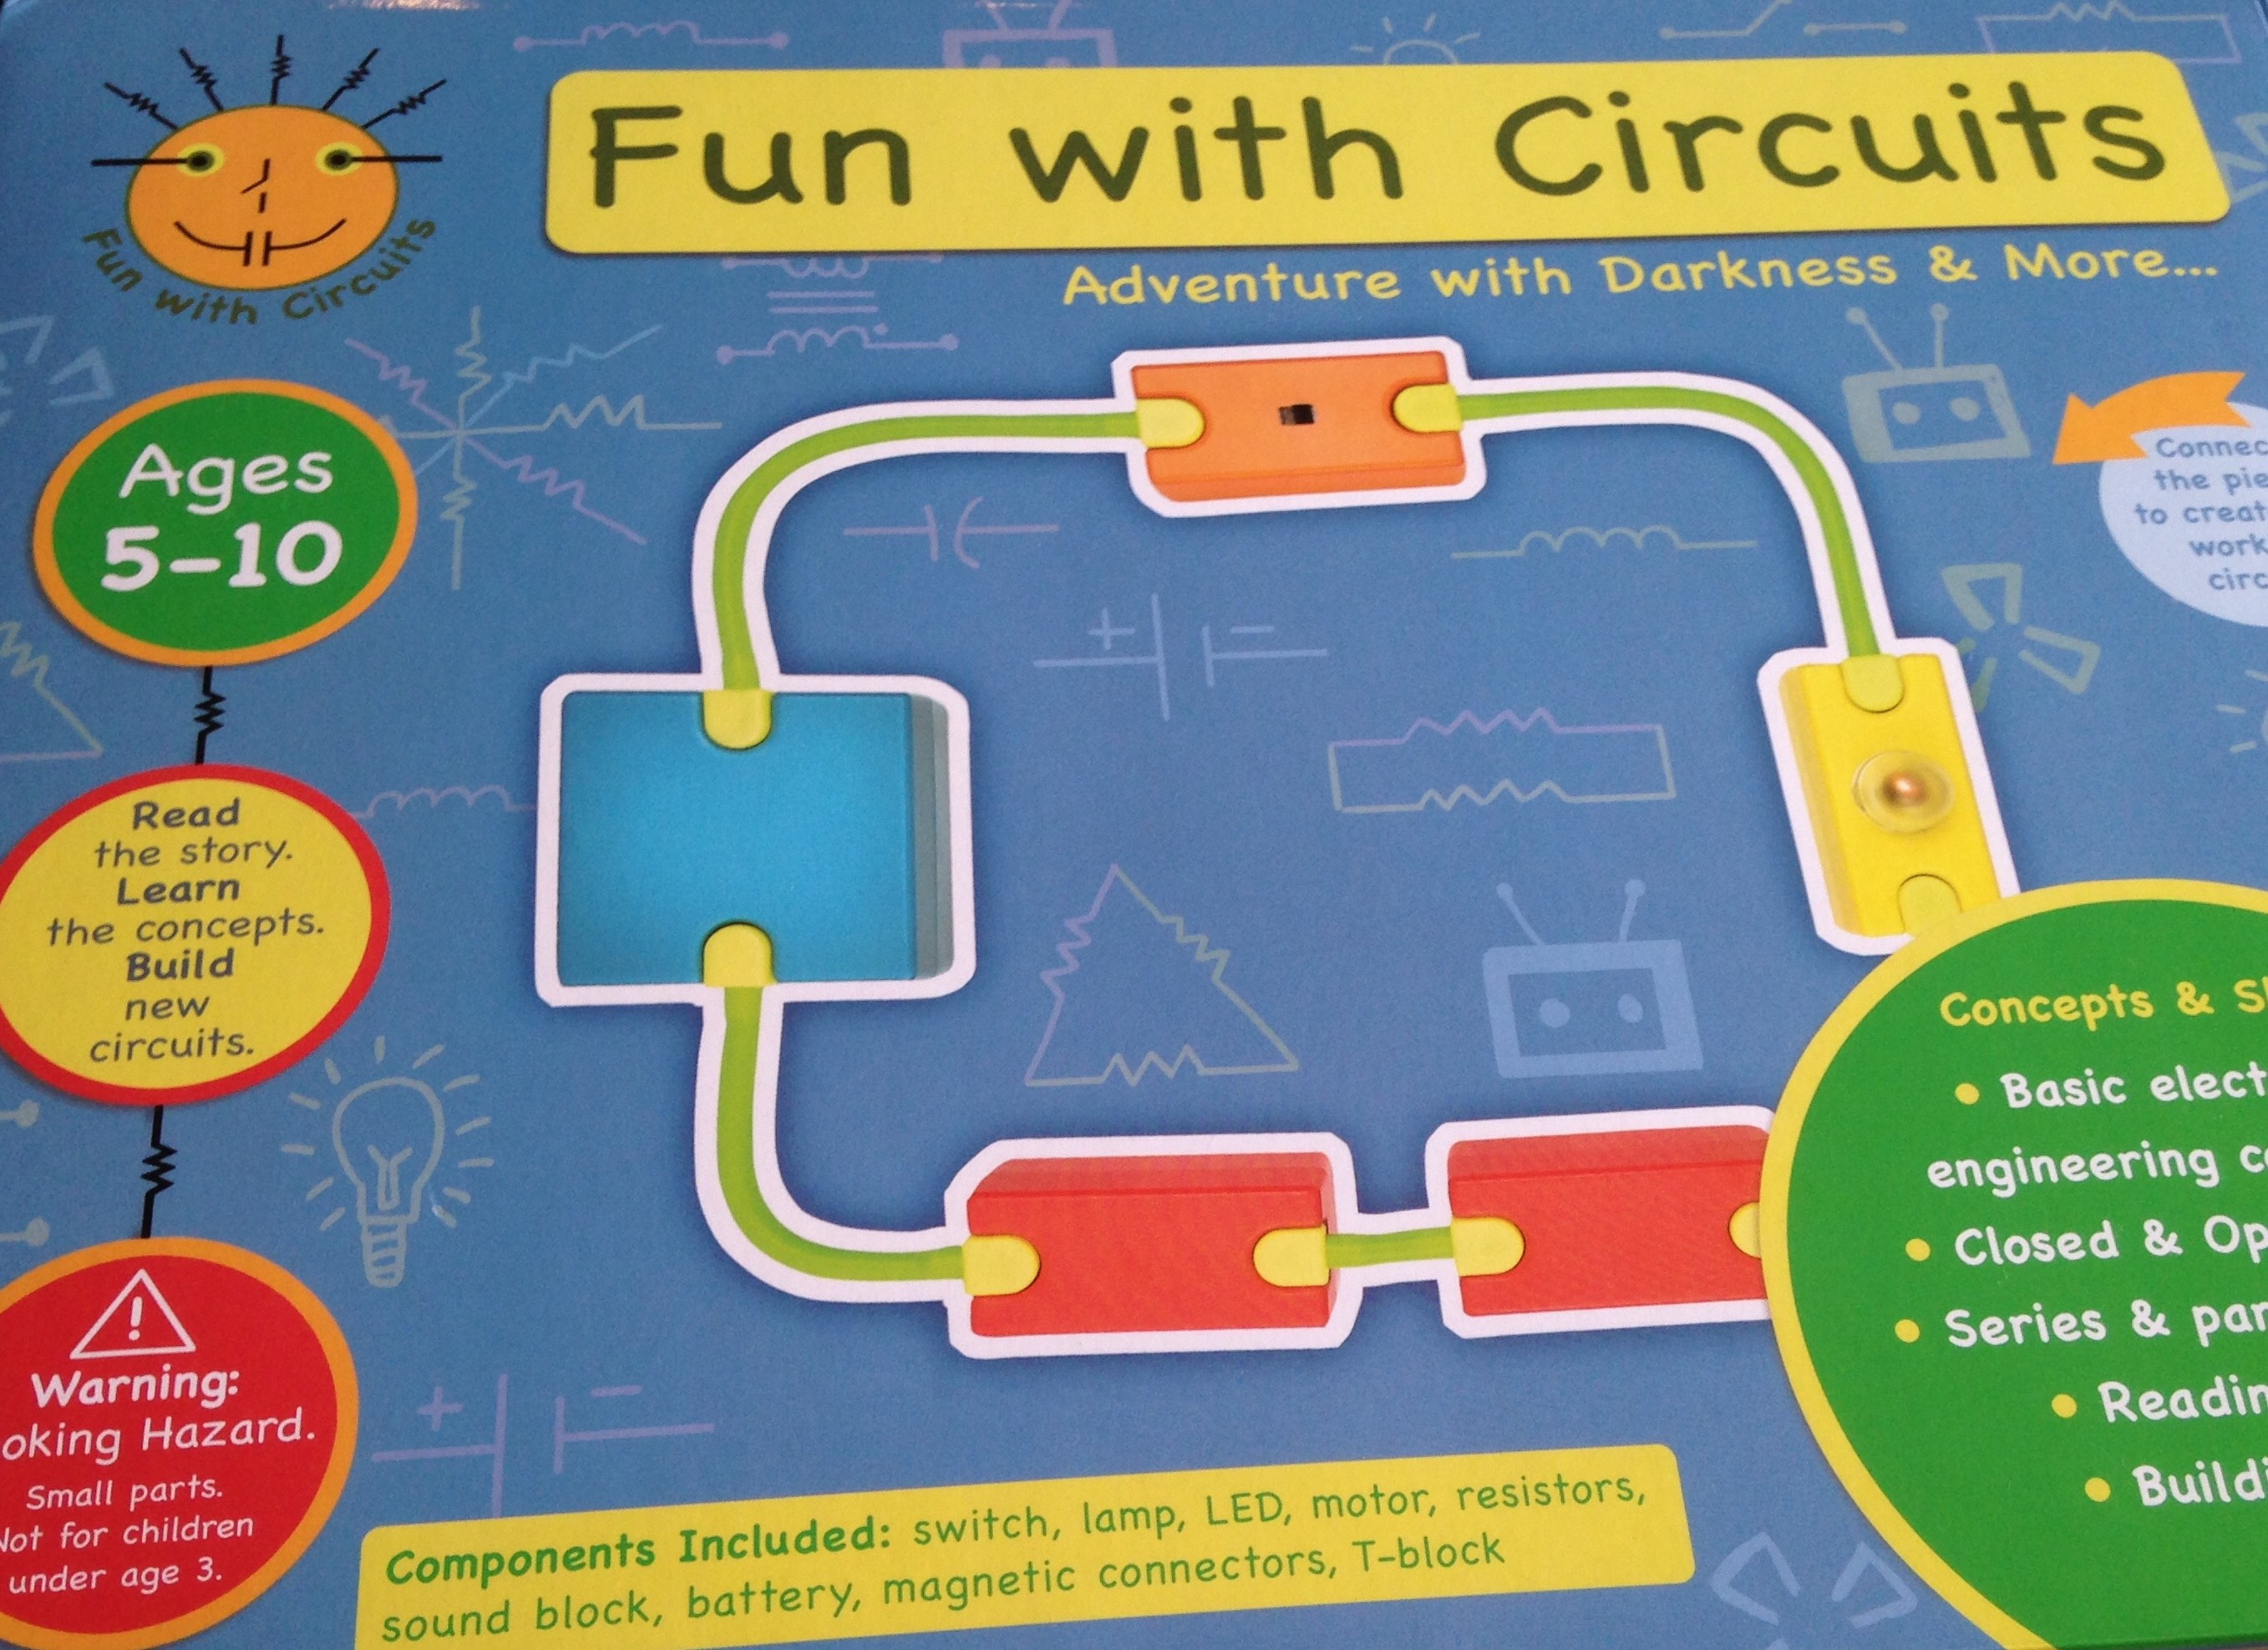 Fun with Circuits Review